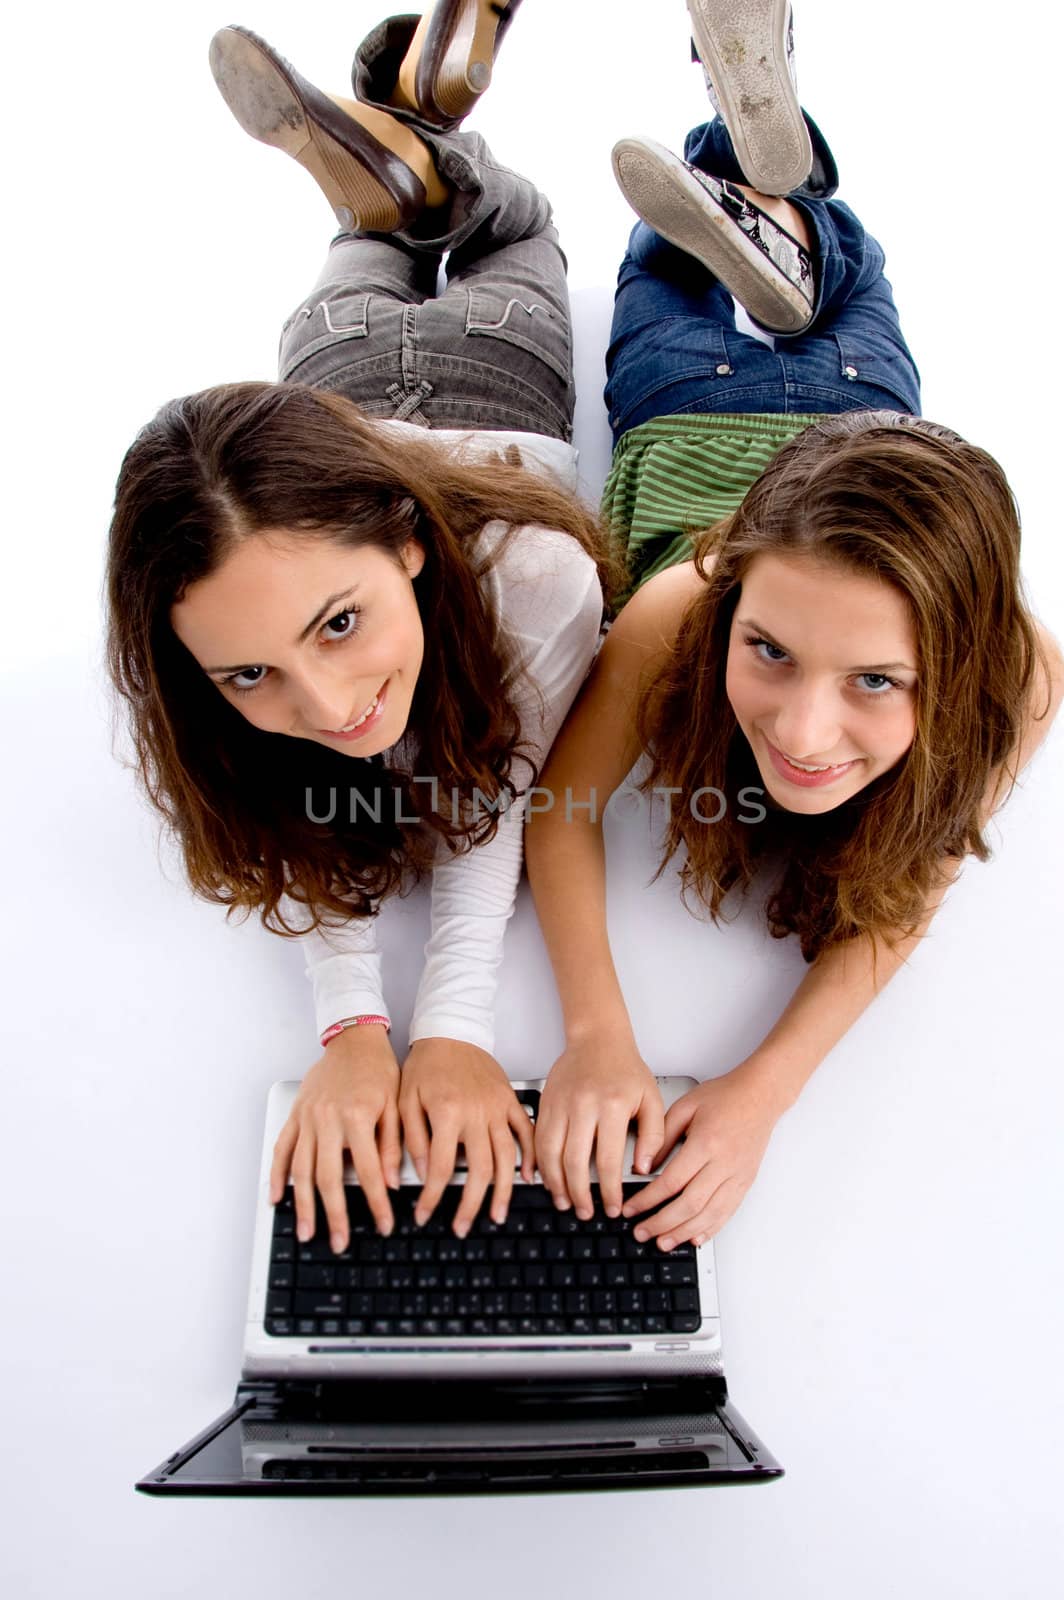 cute teenager girls busy on laptop isolated on white background